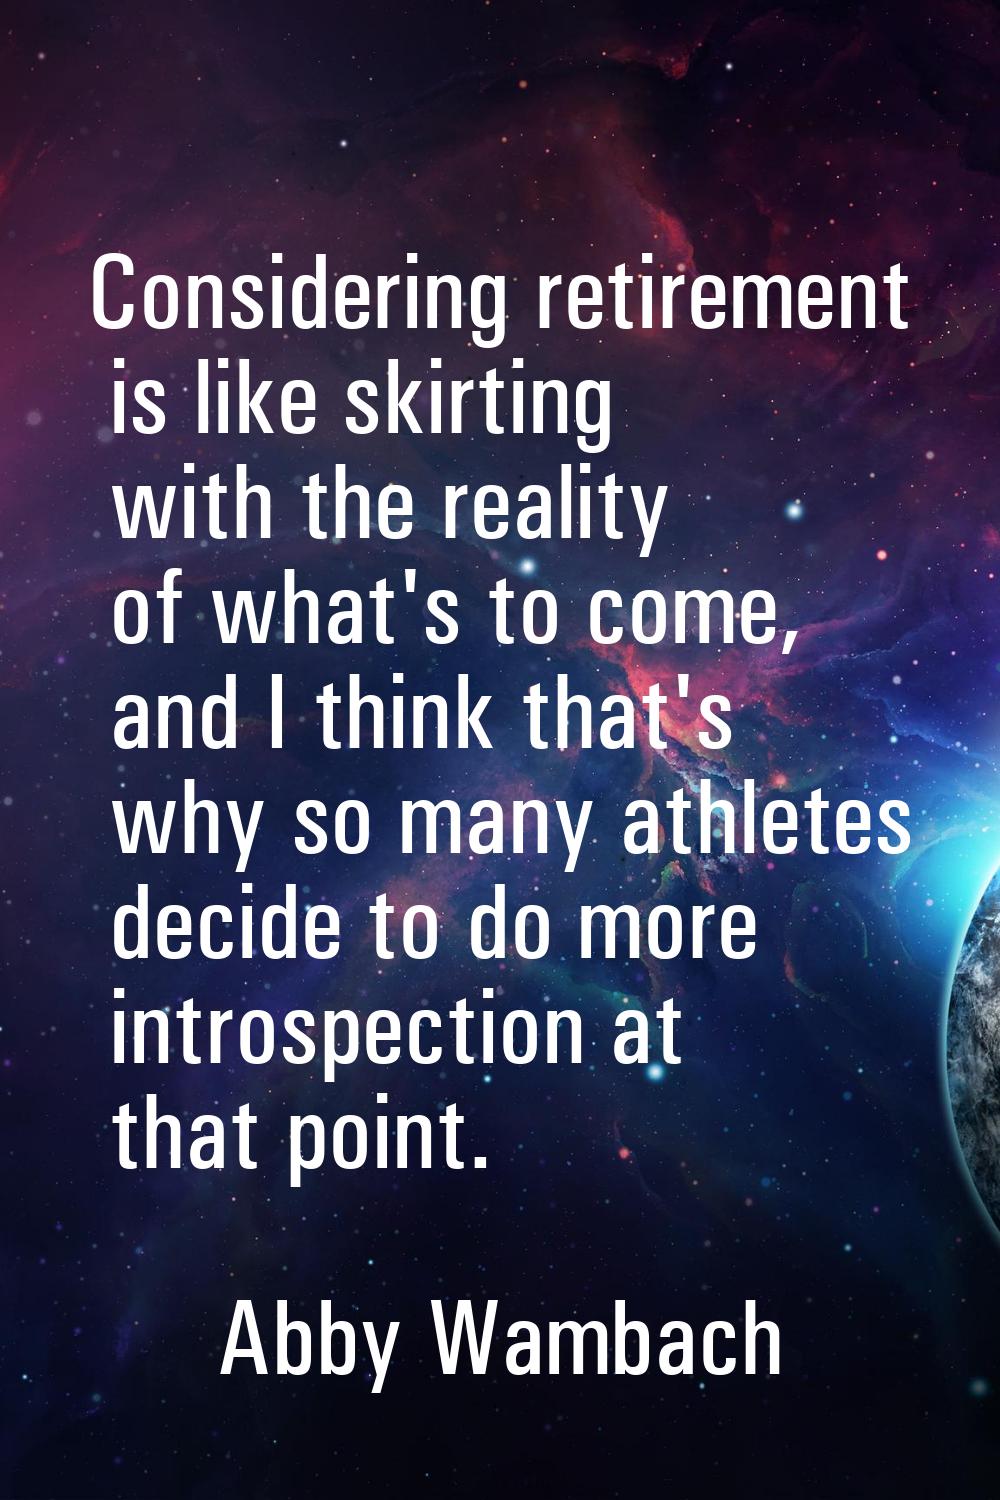 Considering retirement is like skirting with the reality of what's to come, and I think that's why 